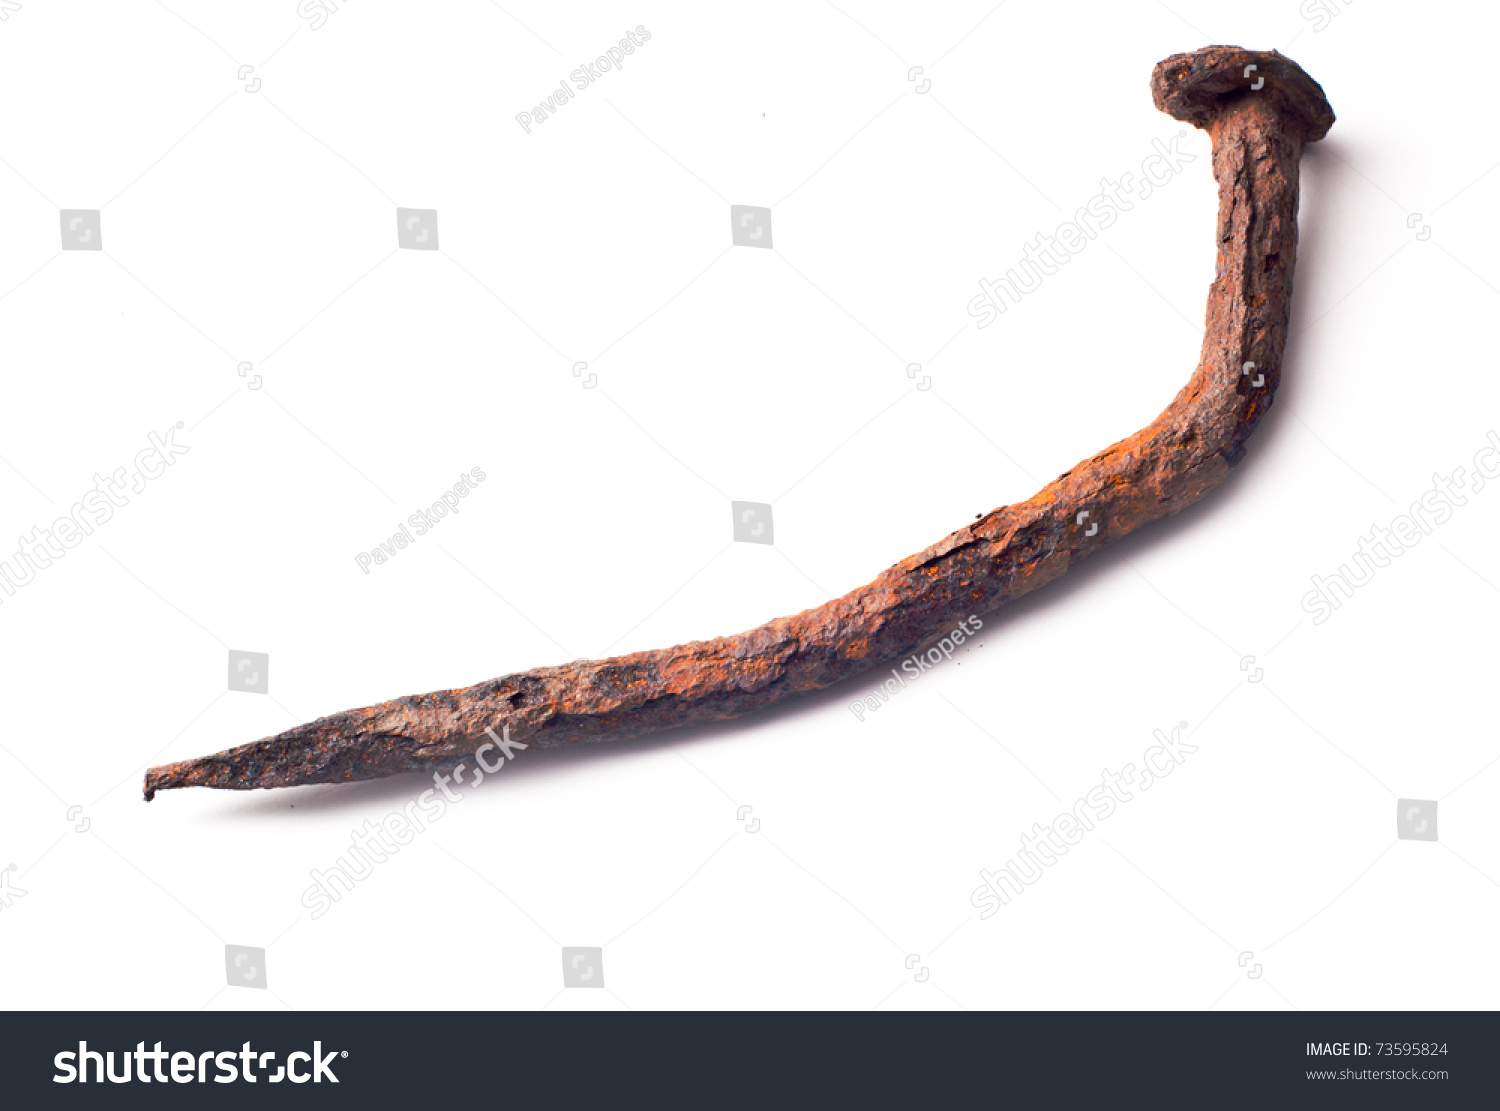 Old rusty nail (antique hand-forged) #73595824